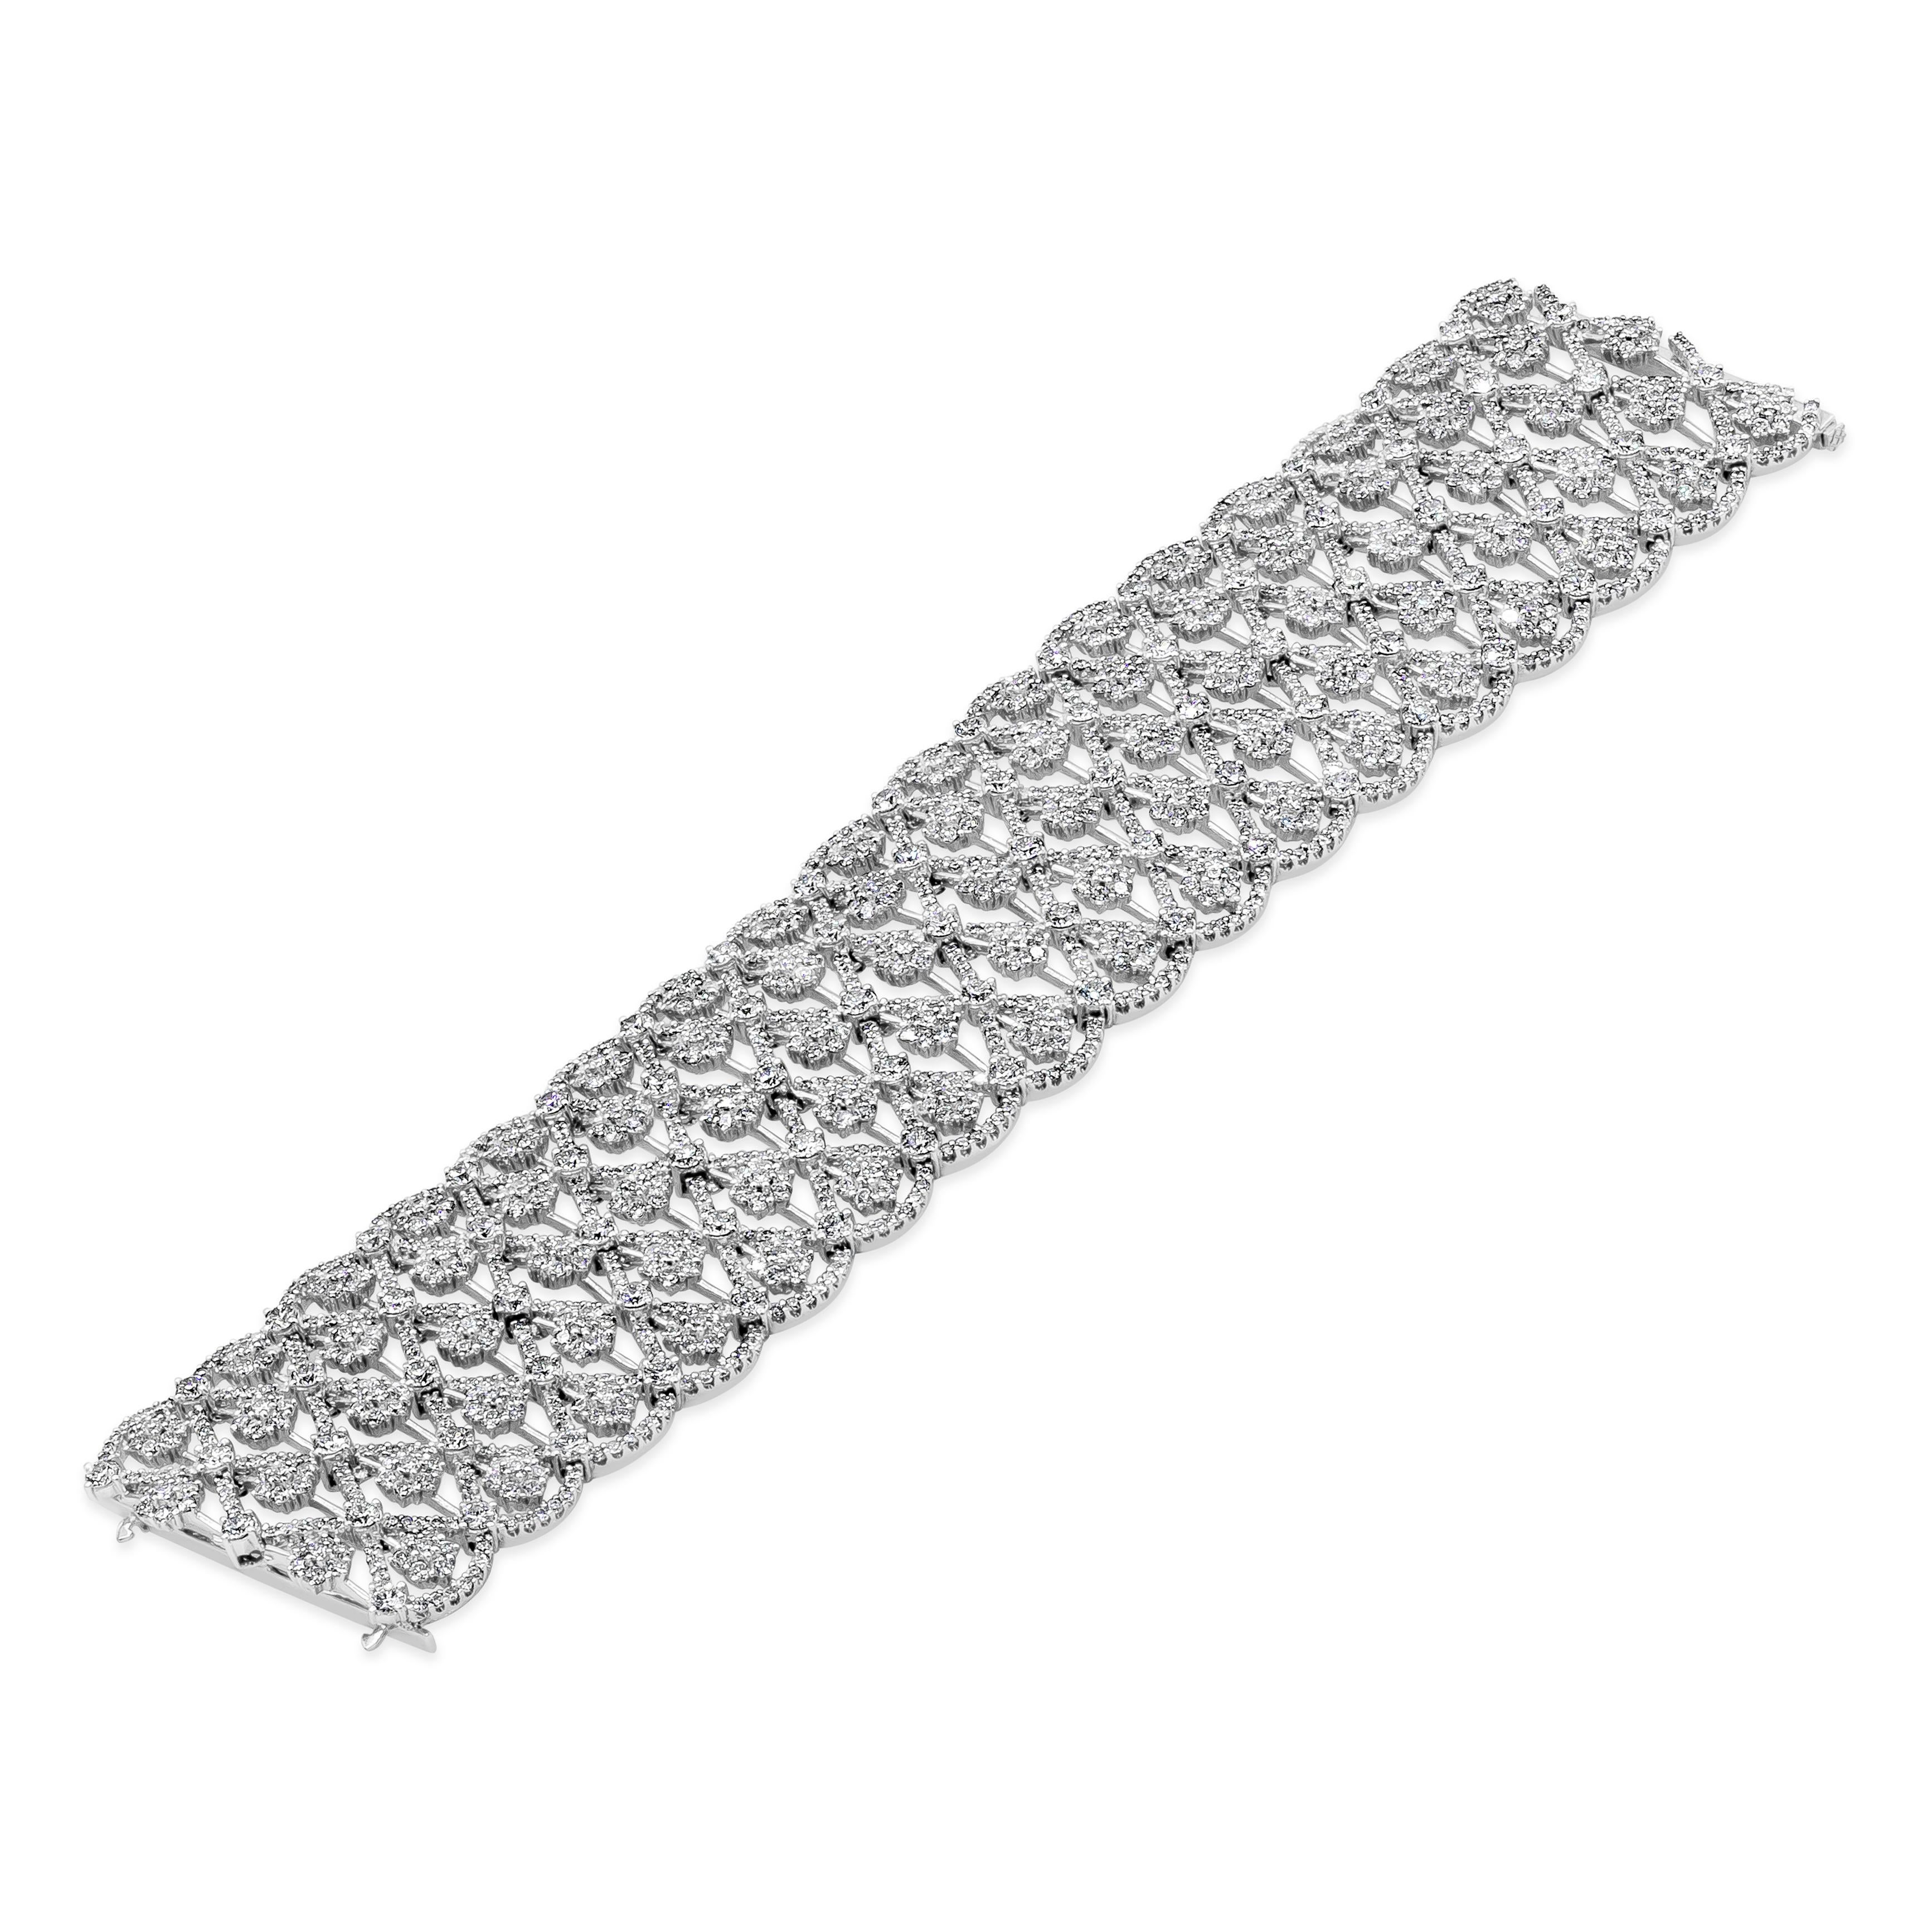 A beautiful and important bracelet showcasing a 28.17 carats of round brilliant diamonds, set in an open-work intricately-designed setting. Made in 18K White Gold and 7 inches in length.

Roman Malakov is a custom house, specializing in creating